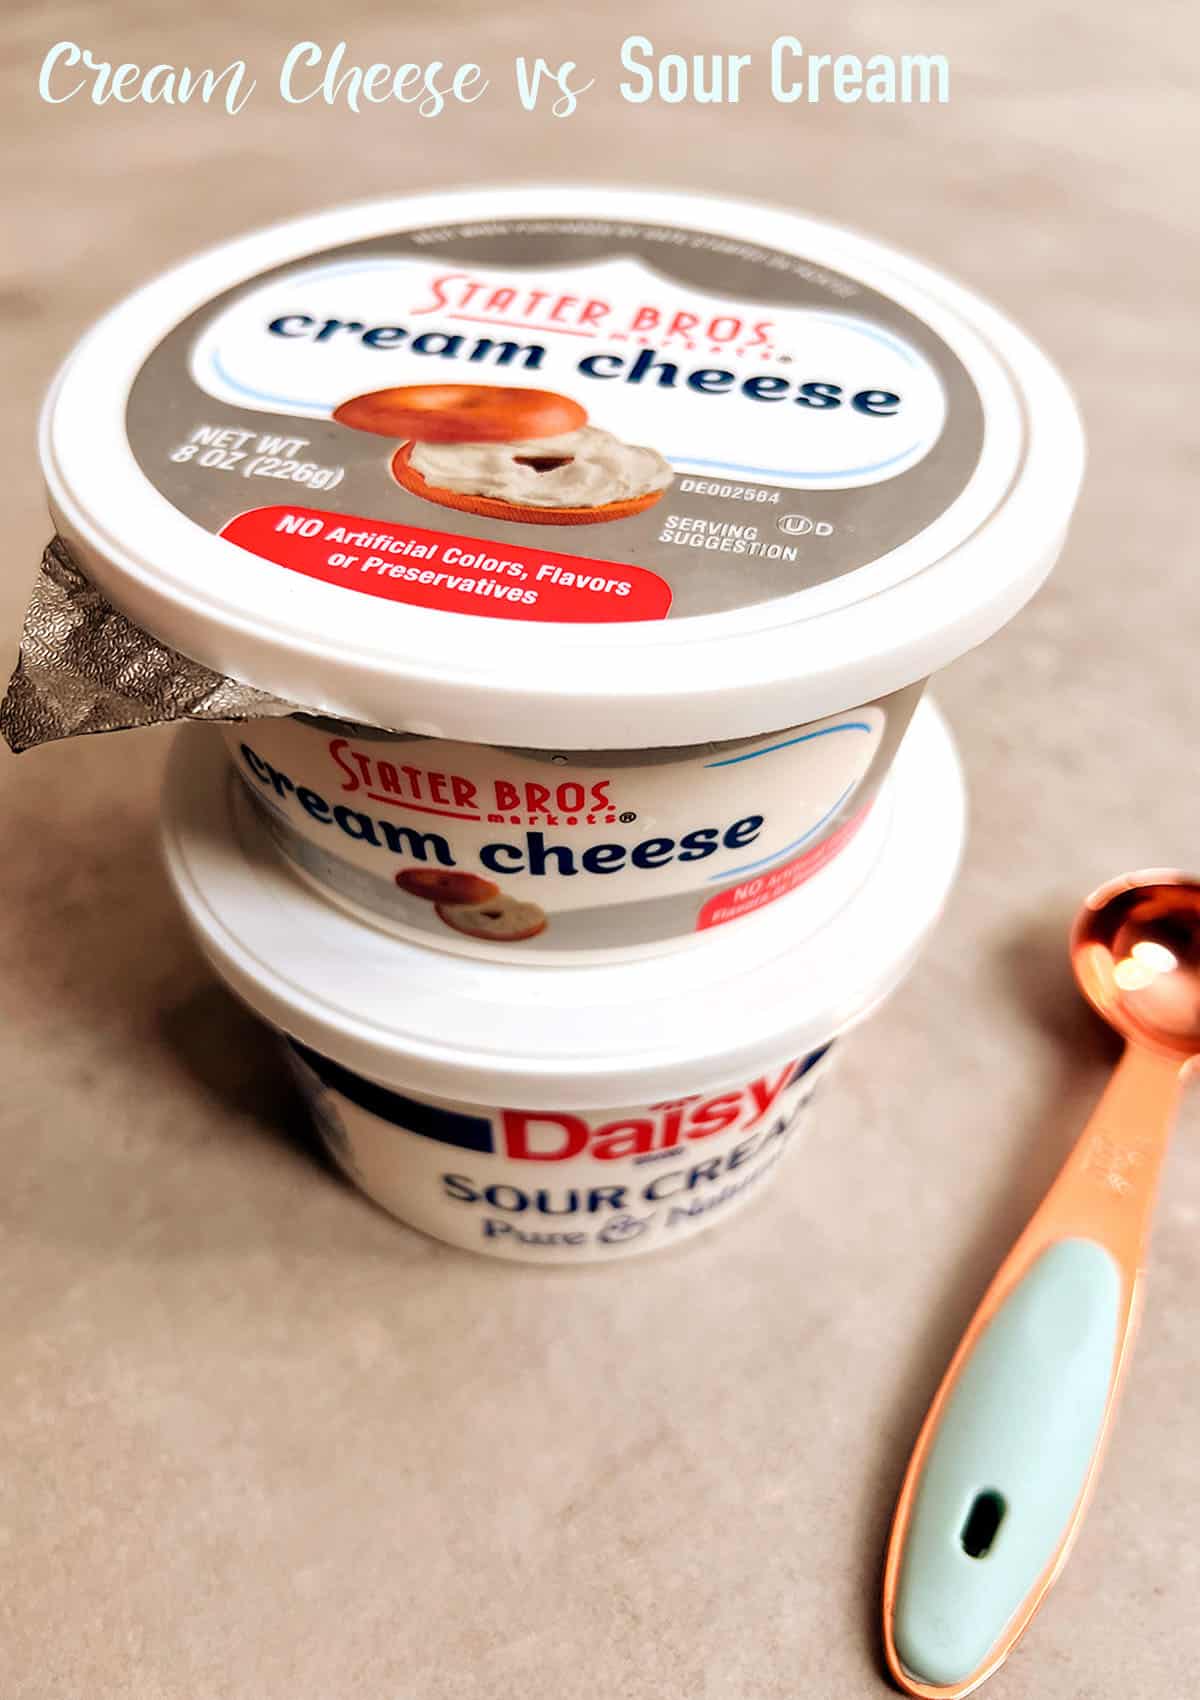 Cream cheese vs sour cream are popular choices in the kitchen, but they differ. This article will explore the unique characteristics of cream cheese and sour cream and help you decide which is best for your next recipe.